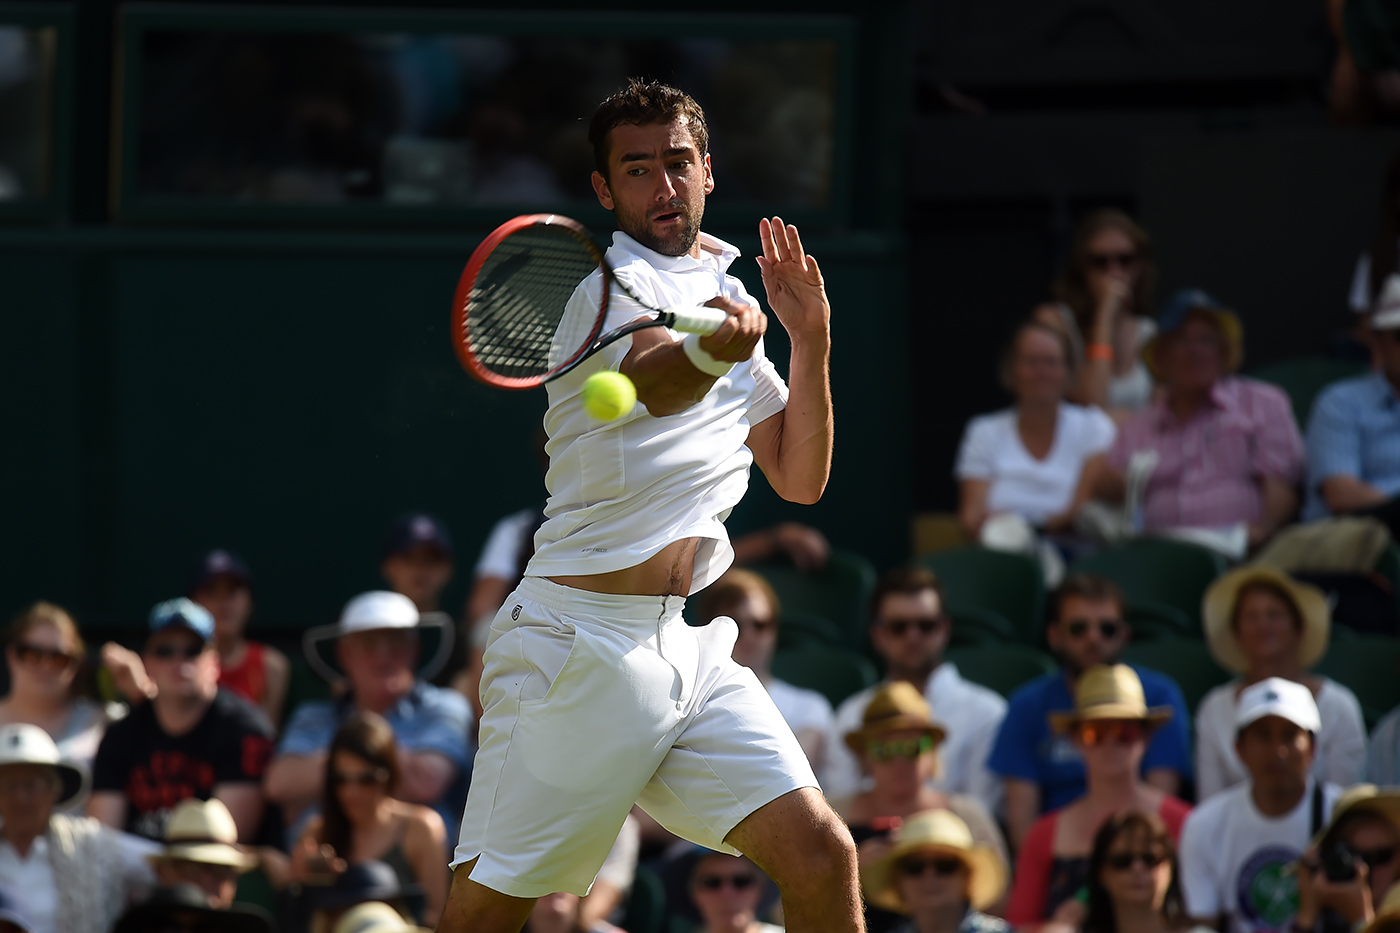 Berankis makes Cilic sweat for victory - The Championships, Wimbledon